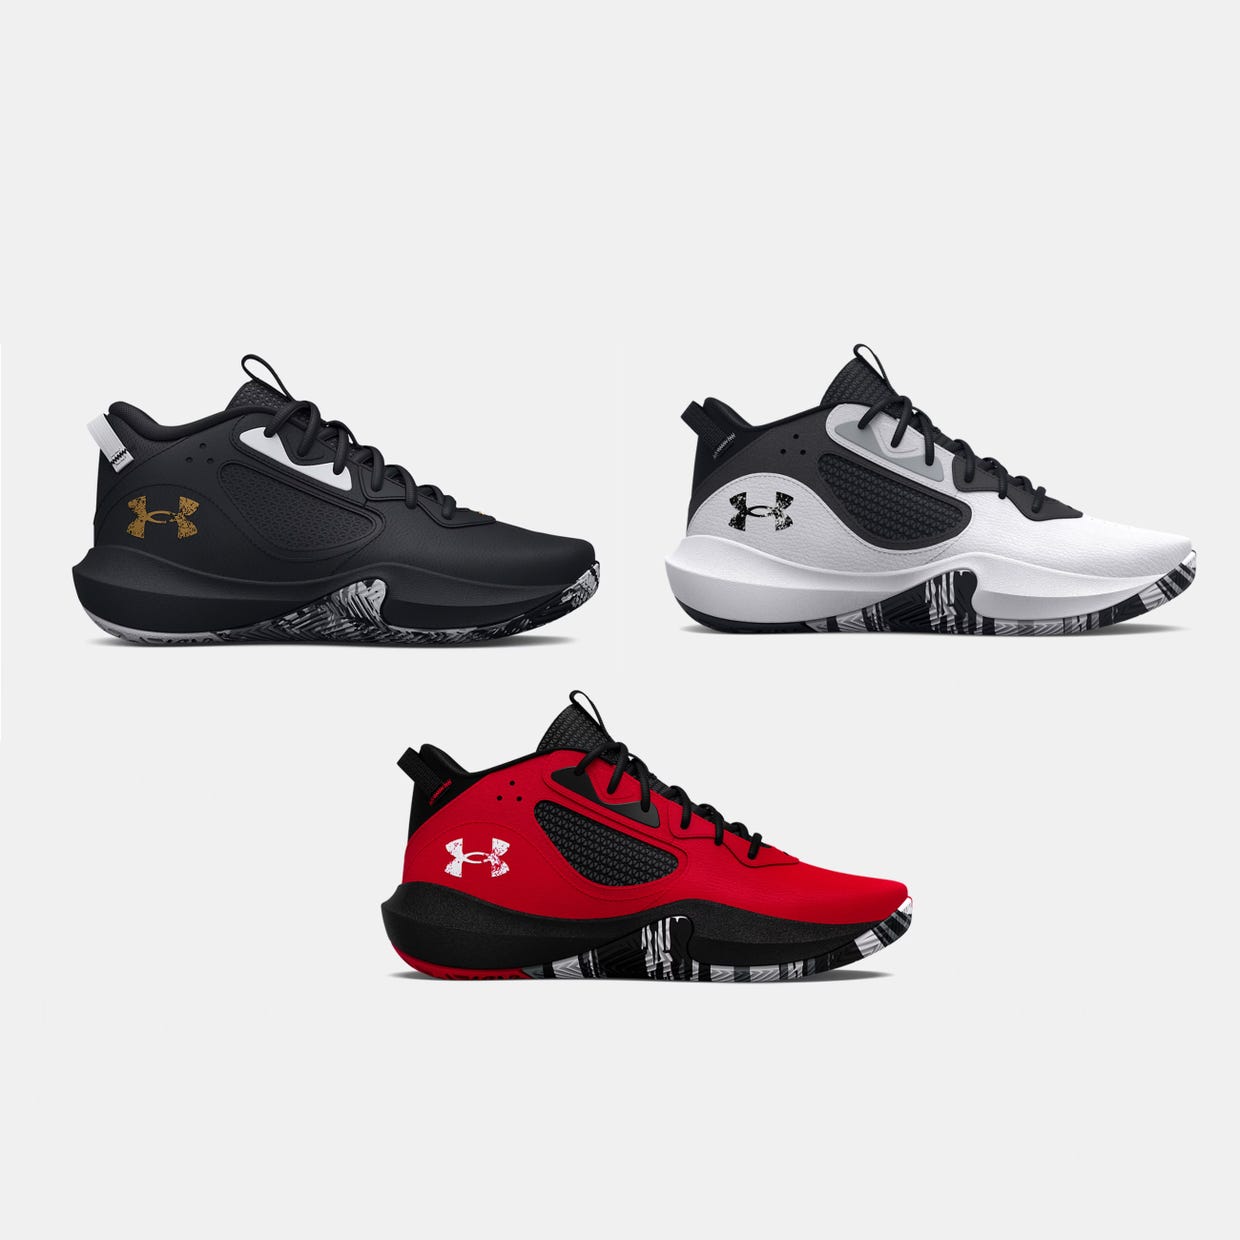 Three pairs of basketball sneakers in black, white, and red colors, each with a distinctive logo on the side.